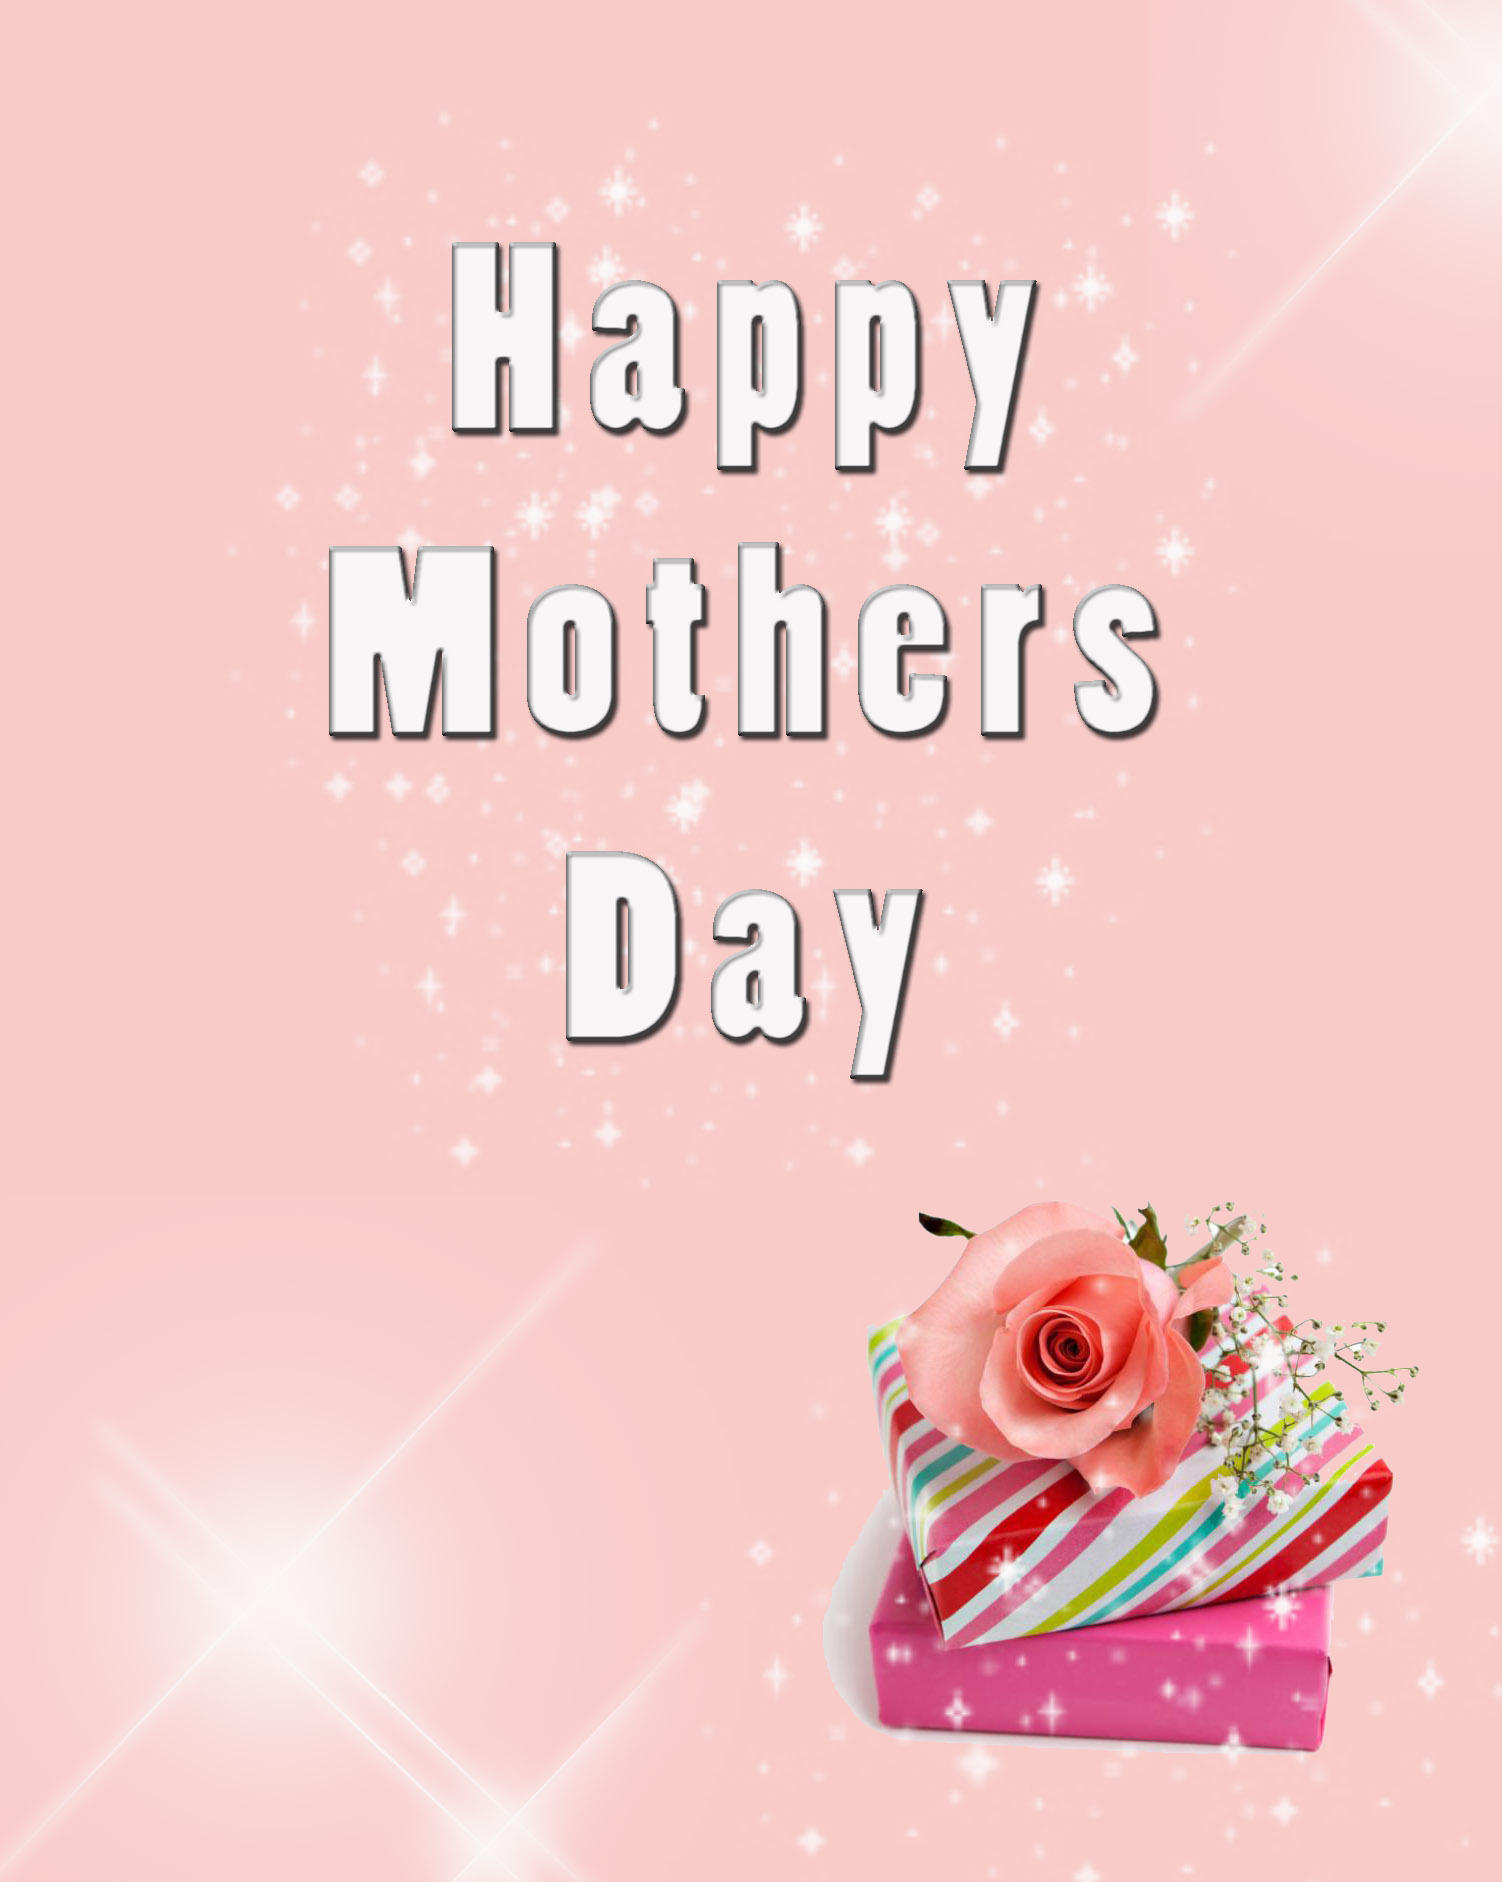 Happy mother’s day 2018 hd image free download